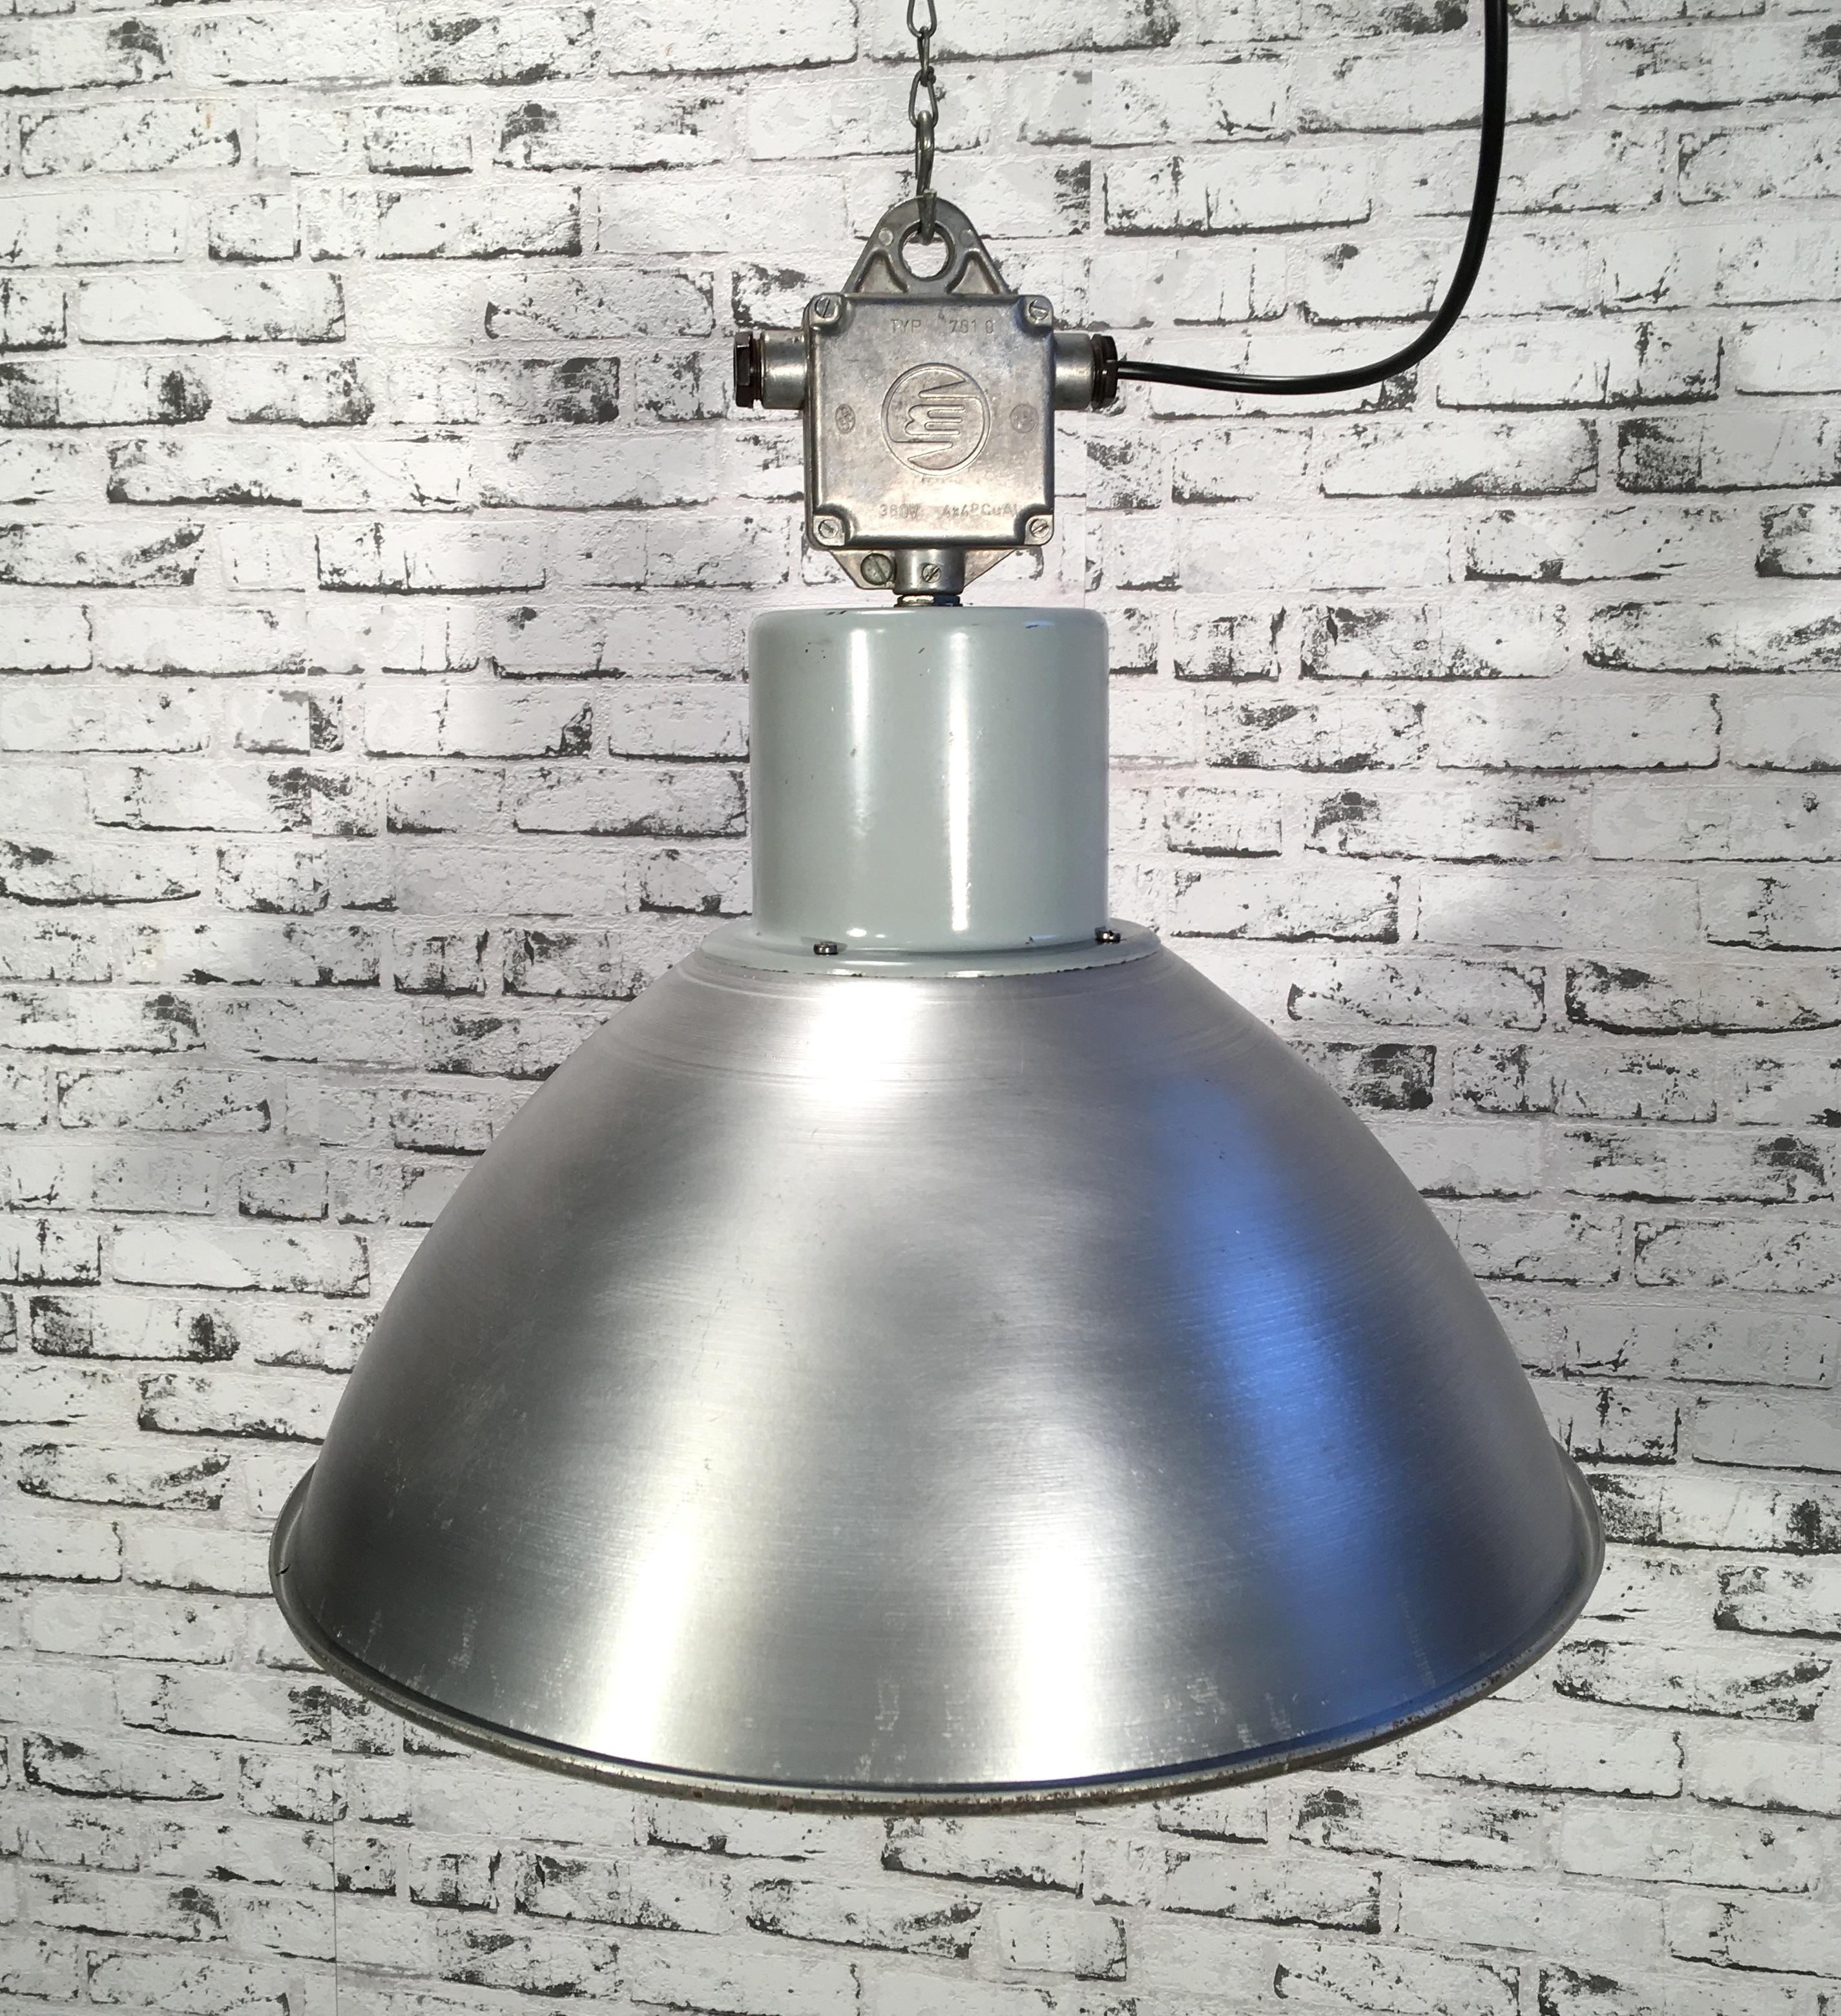 This pendant lamp was originally used in a factory in former Czechoslovakia in the 1960s. The piece is comprised of an aluminum lampshade and a cast aluminum top. The lamp is fully functional and features a new porcelain E27-socket and wire. The